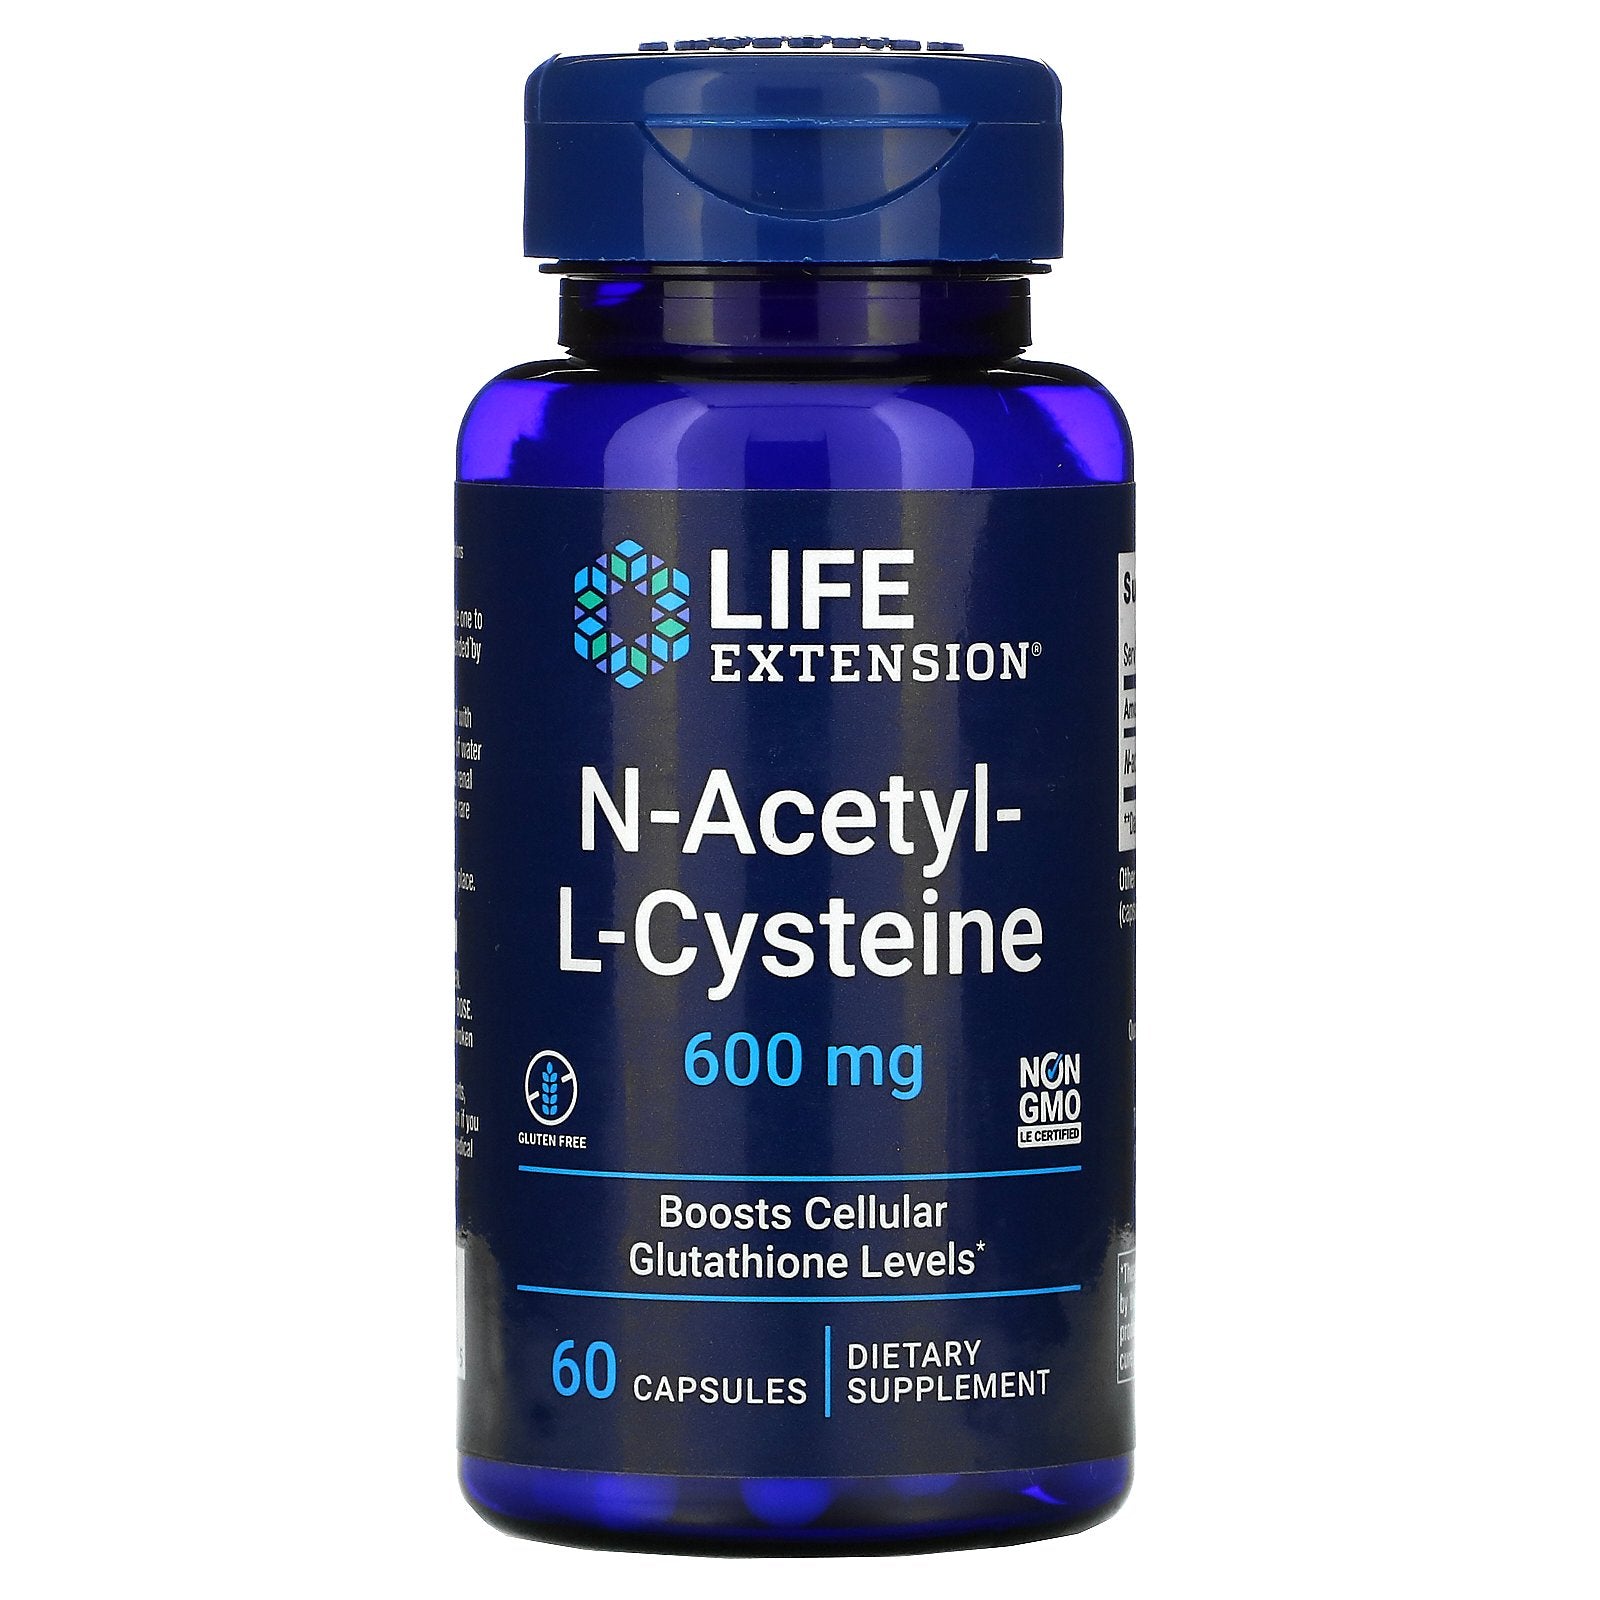 Life Extension, N-Acetyl-L-Cysteine, 600 mg Capsules